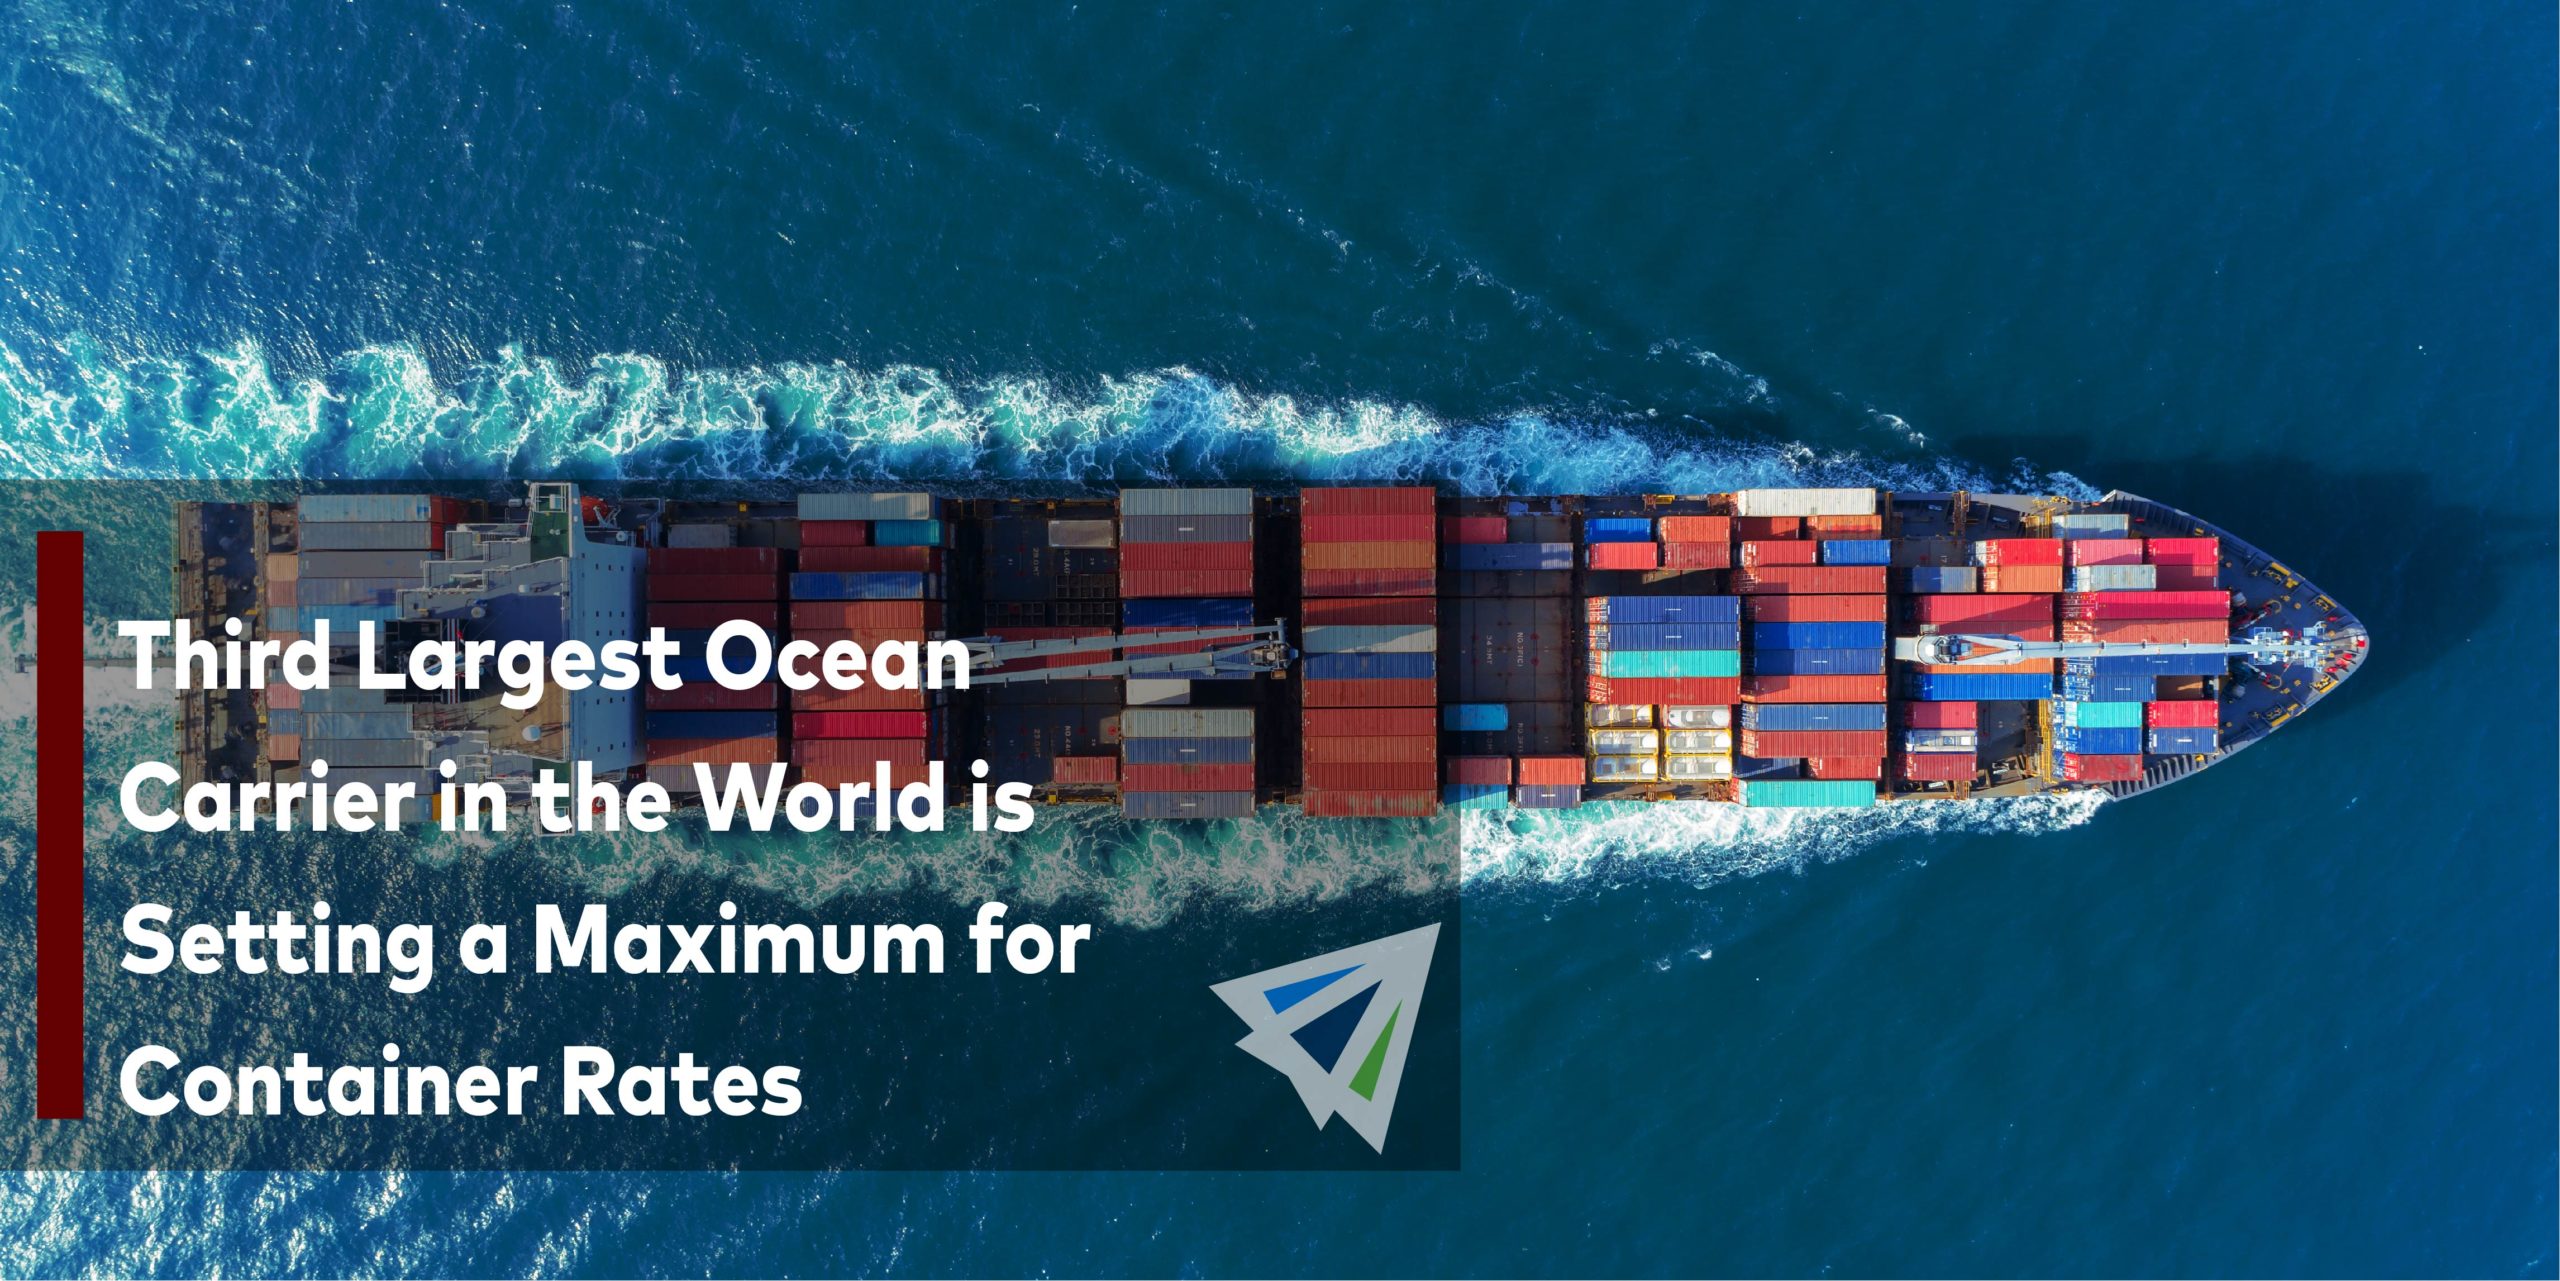 Third Largest Ocean Carrier in the World is Setting a Maximum for Container Rates